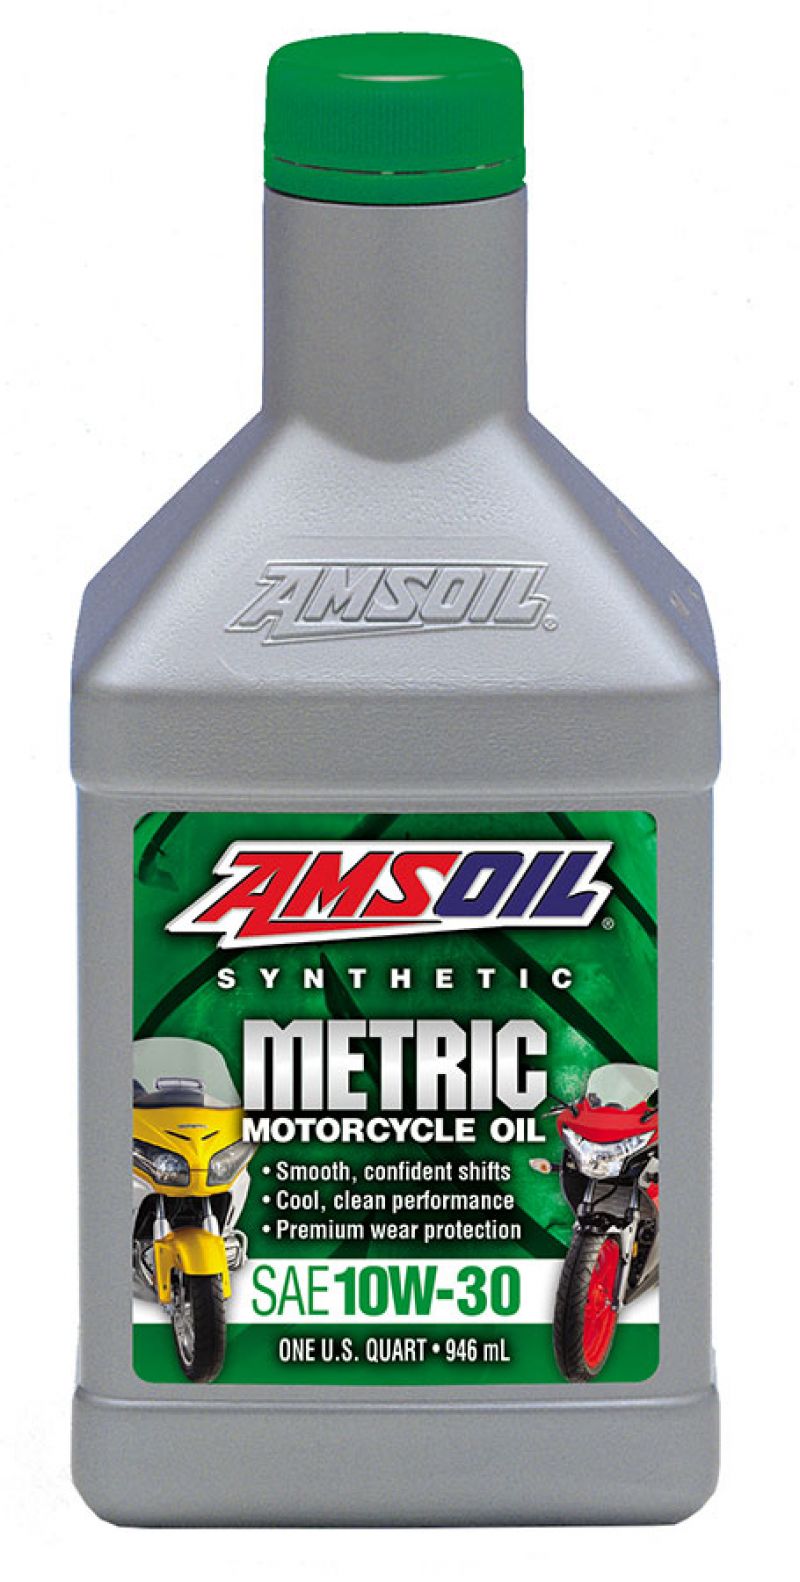 Amsoil 10W-30 Synthetic Metric